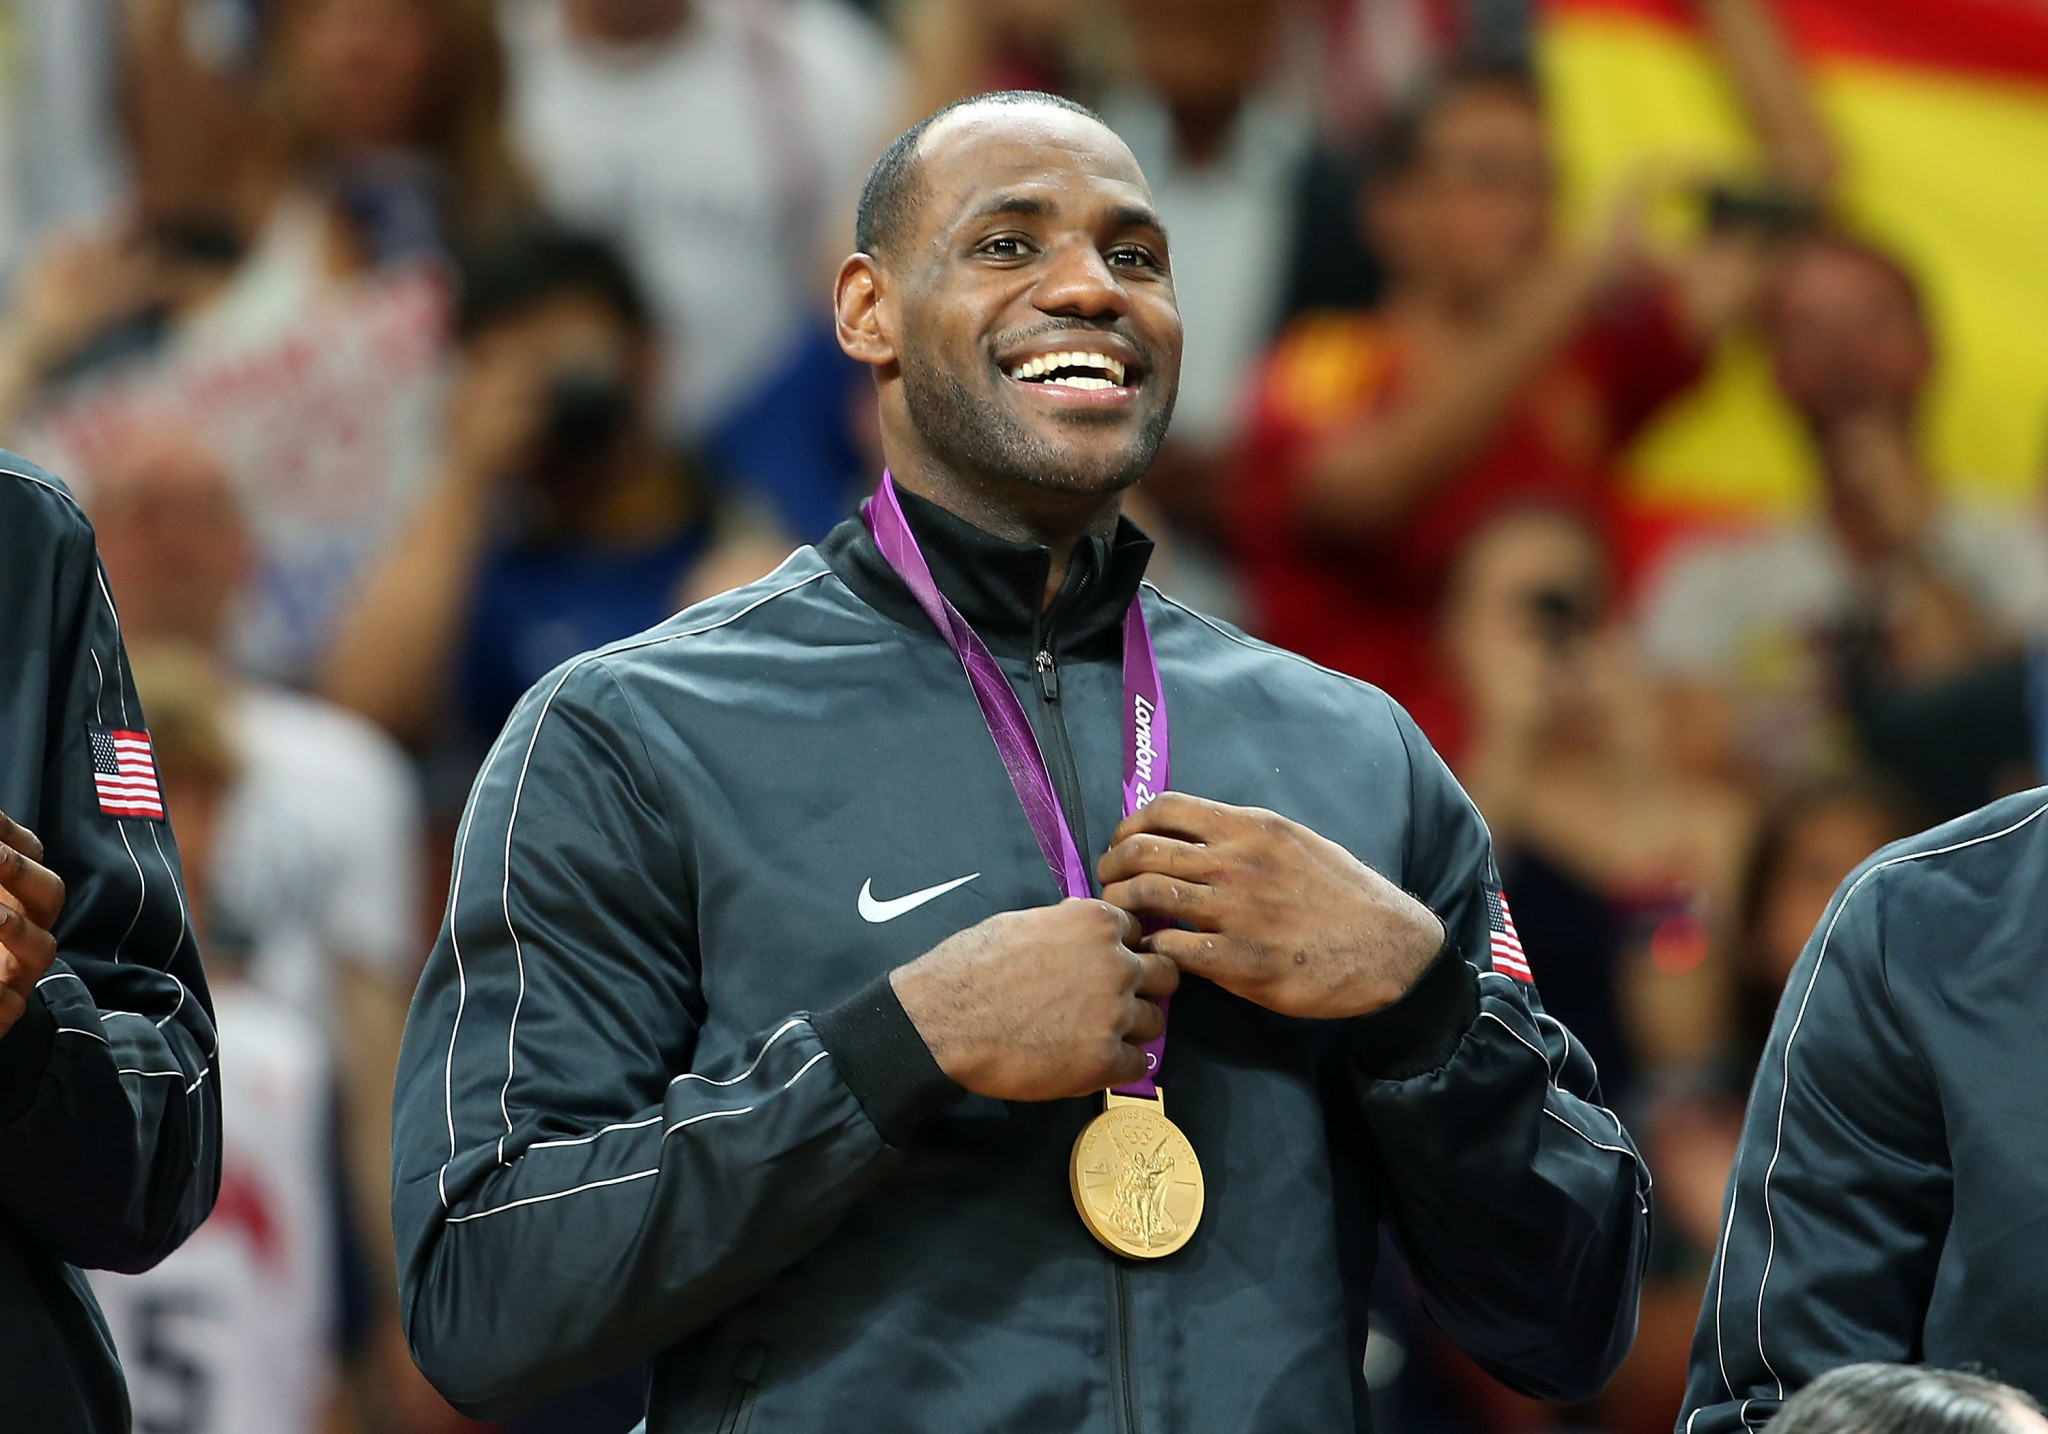 LeBron James is already a two-time Olympic gold medallist having been a member of the United States team that won at Beijing 2008 and London 2012 ©Getty Images